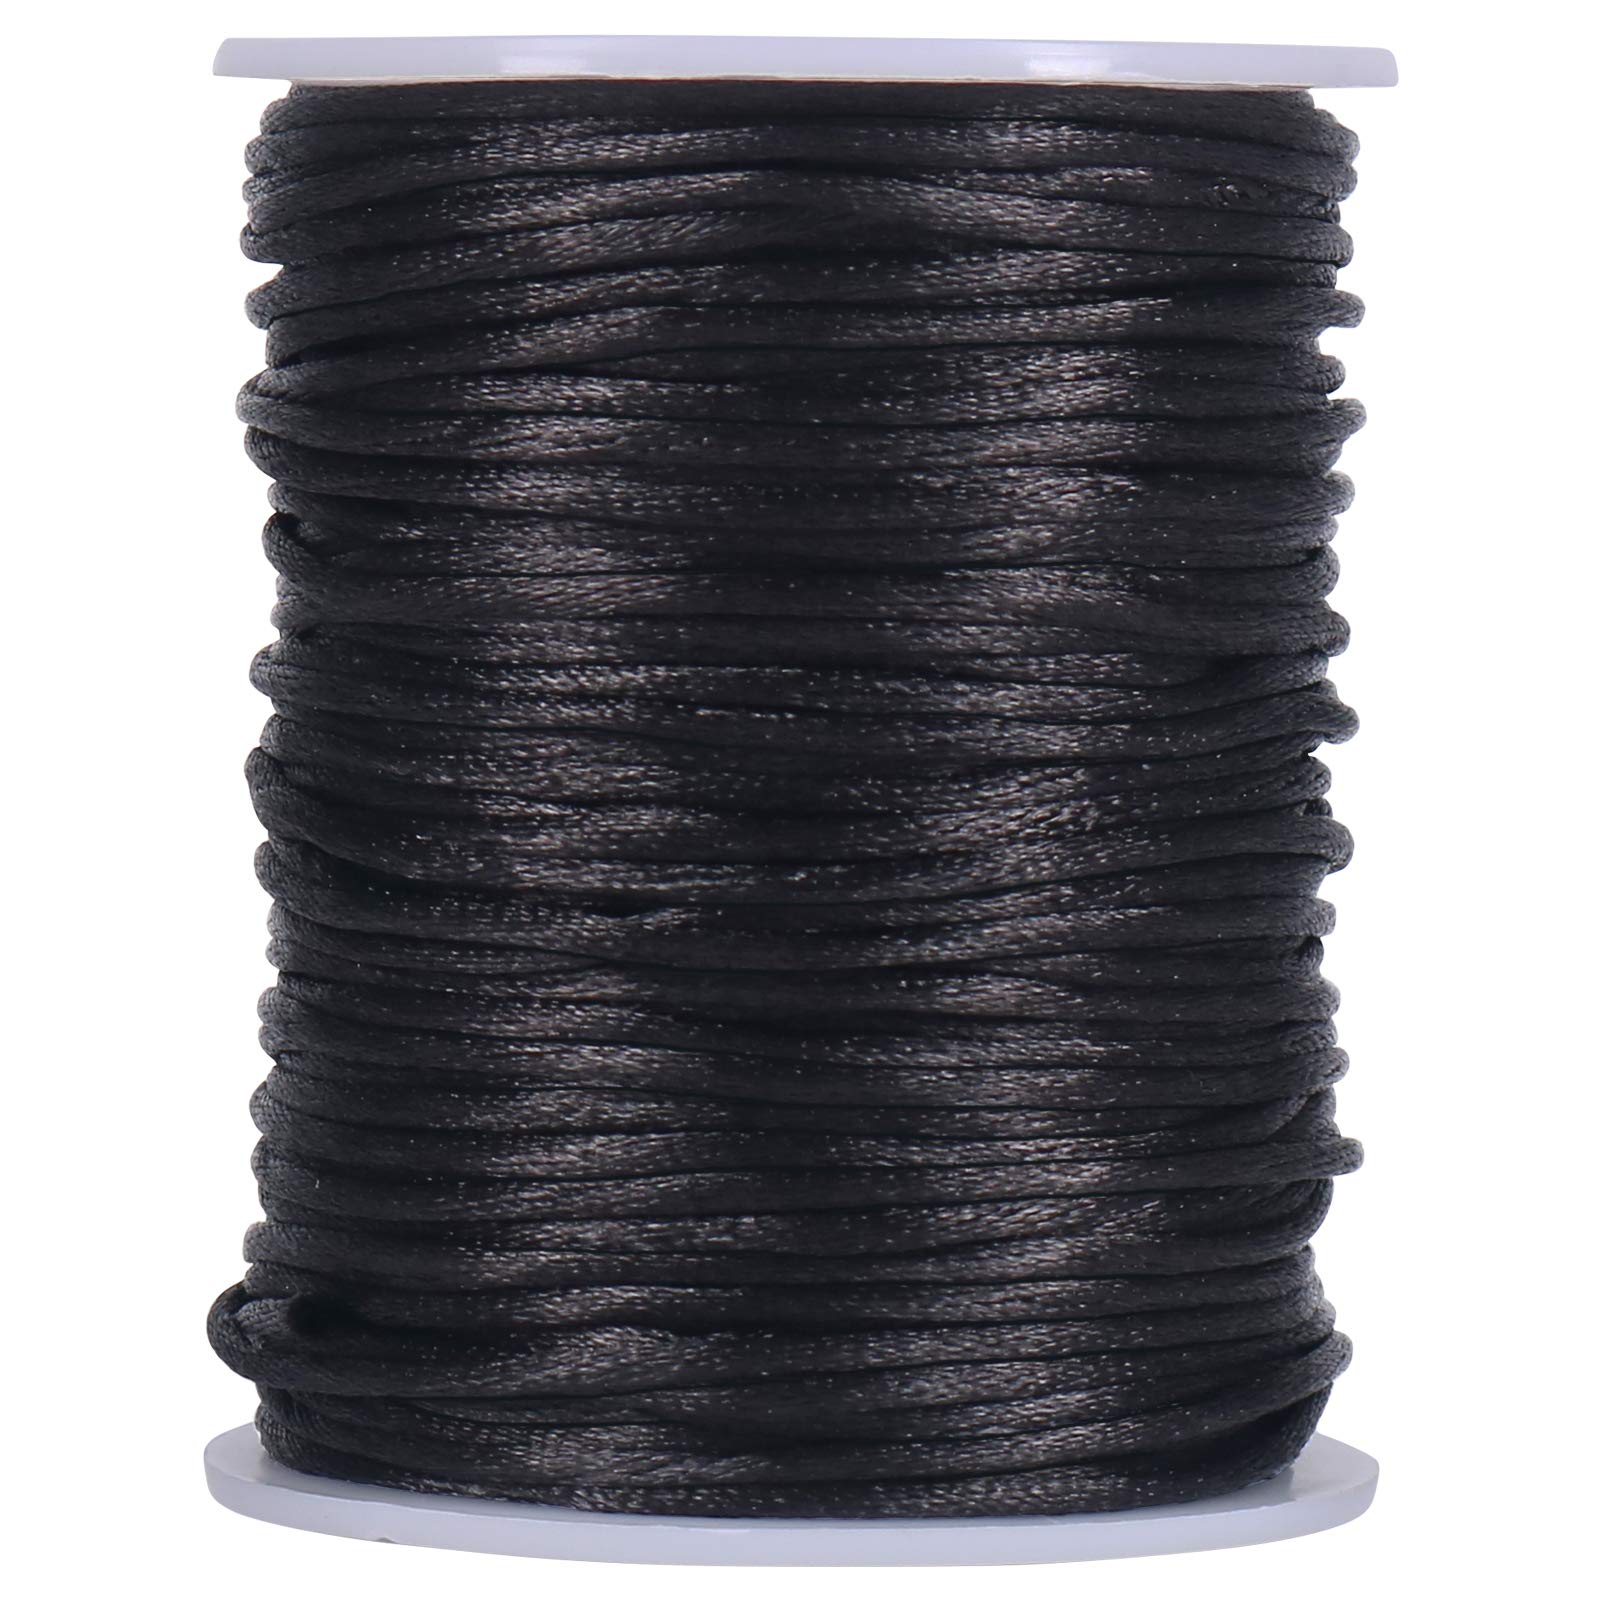 Tenn Well 2mm Satin Cord, 295 Feet Black Silky Rattail Nylon Cord for  Jewelry Making, Macrame Bracelets, Necklaces, Beading, Arts and Crafts  Black 2mm